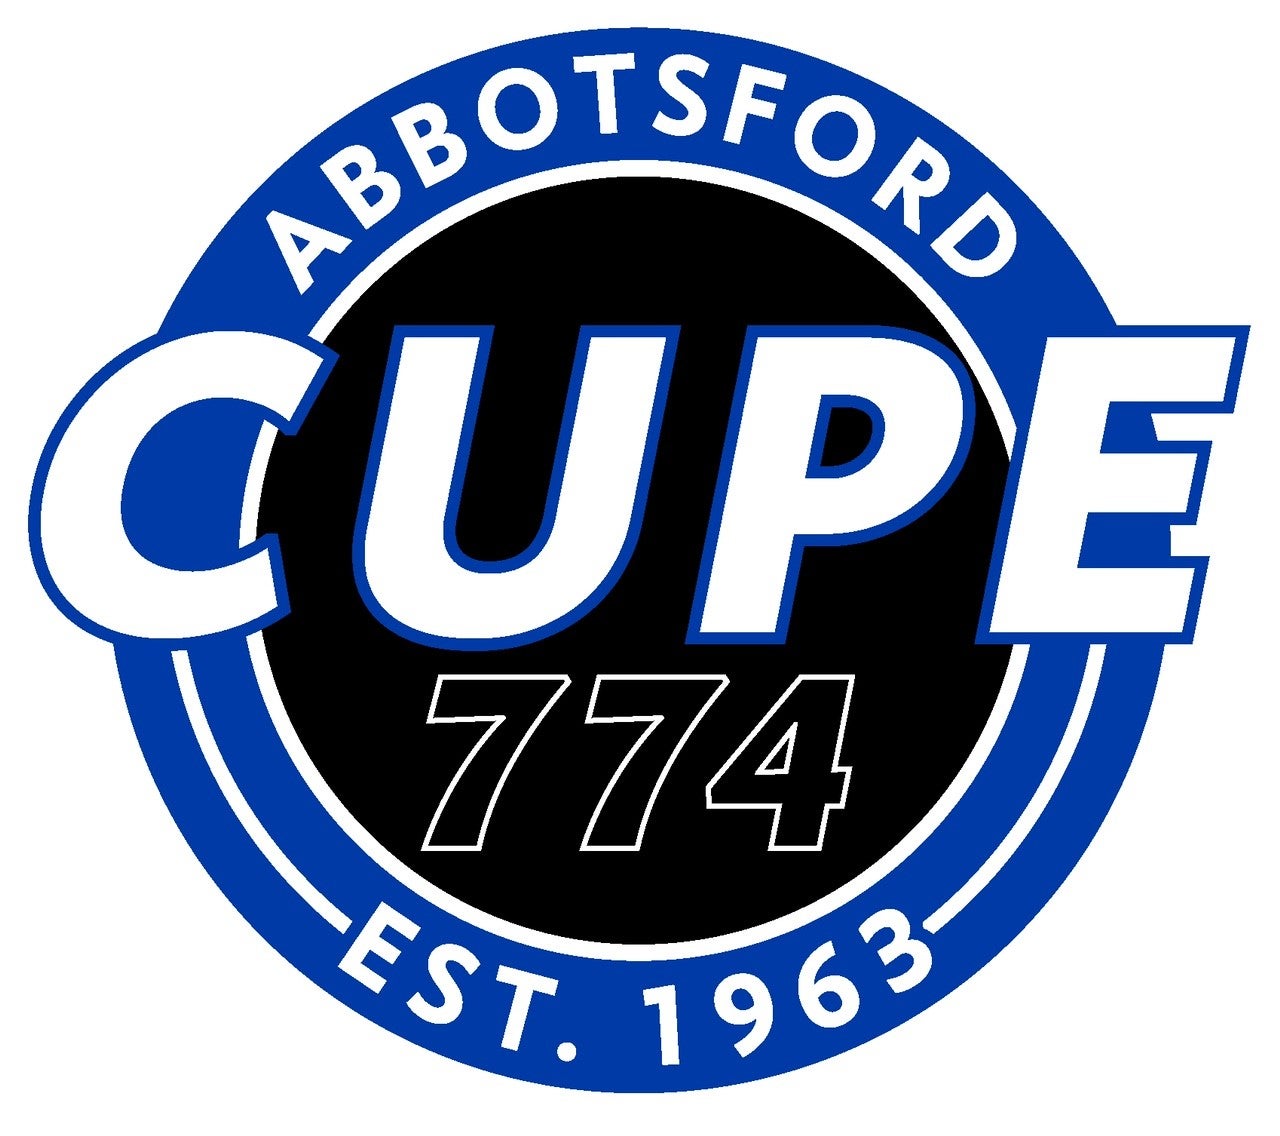 CUPE 774